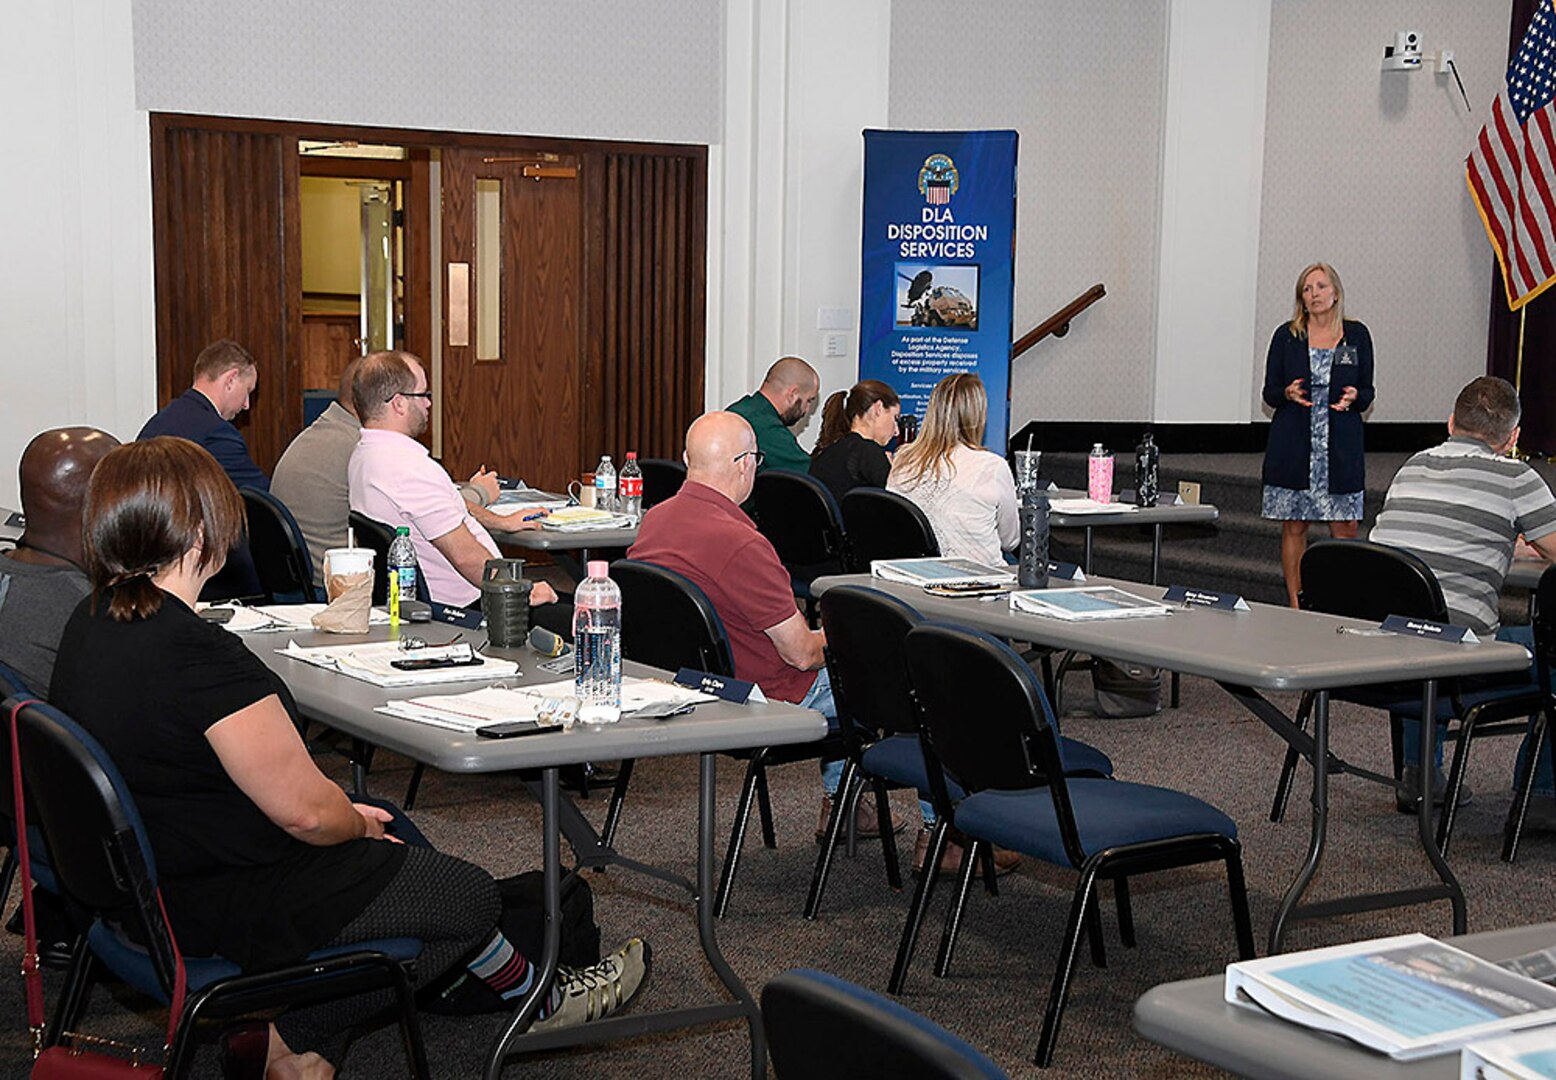 GSA Southwest Central Branch Chief Ericka Grim gives a brief on sales contracting at DLA Disposition Services headquarters in Battle Creek, Michigan, as part of a week of combined agency training in September.